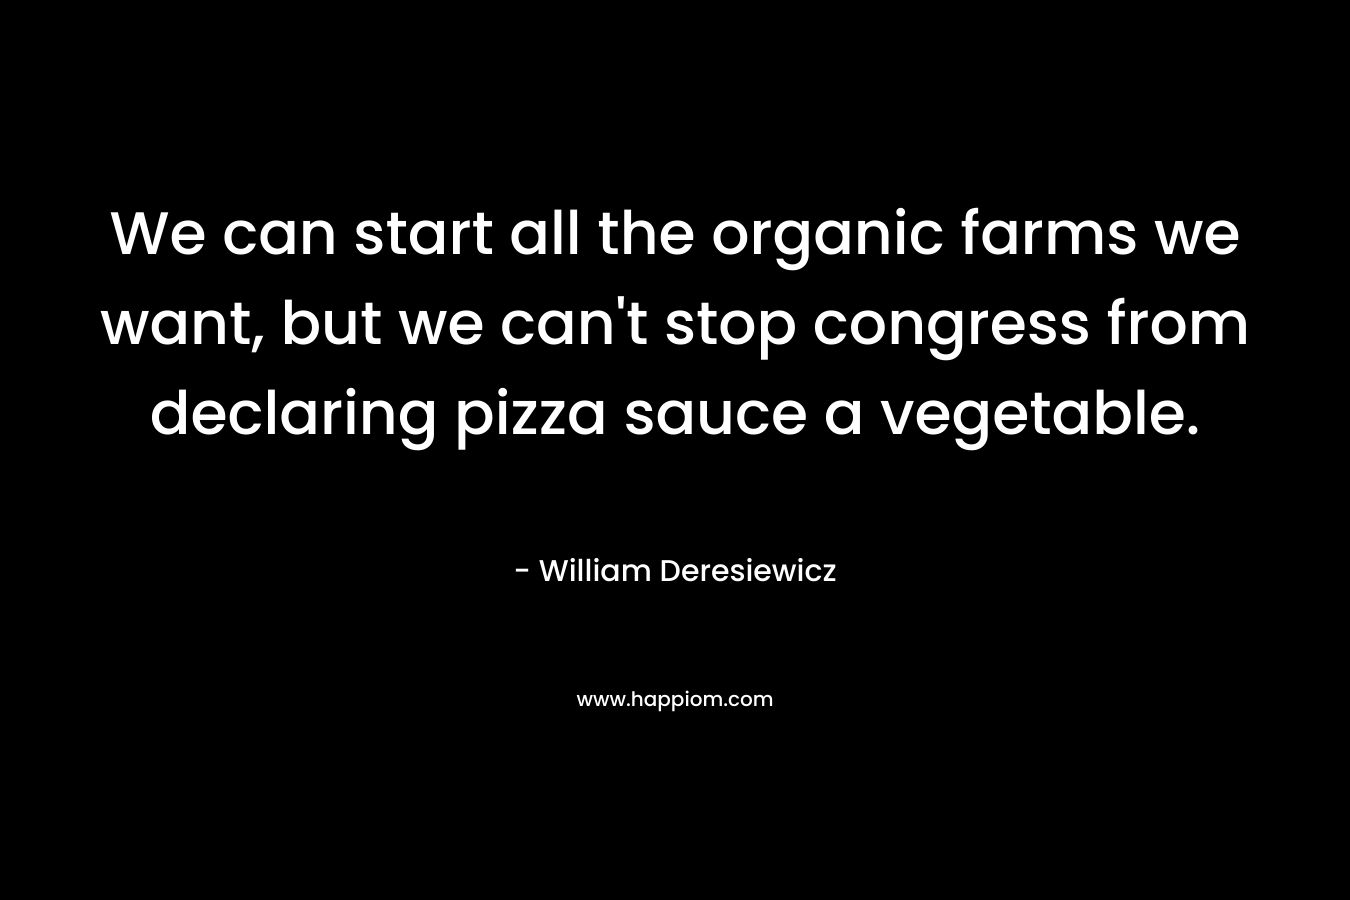 We can start all the organic farms we want, but we can't stop congress from declaring pizza sauce a vegetable.